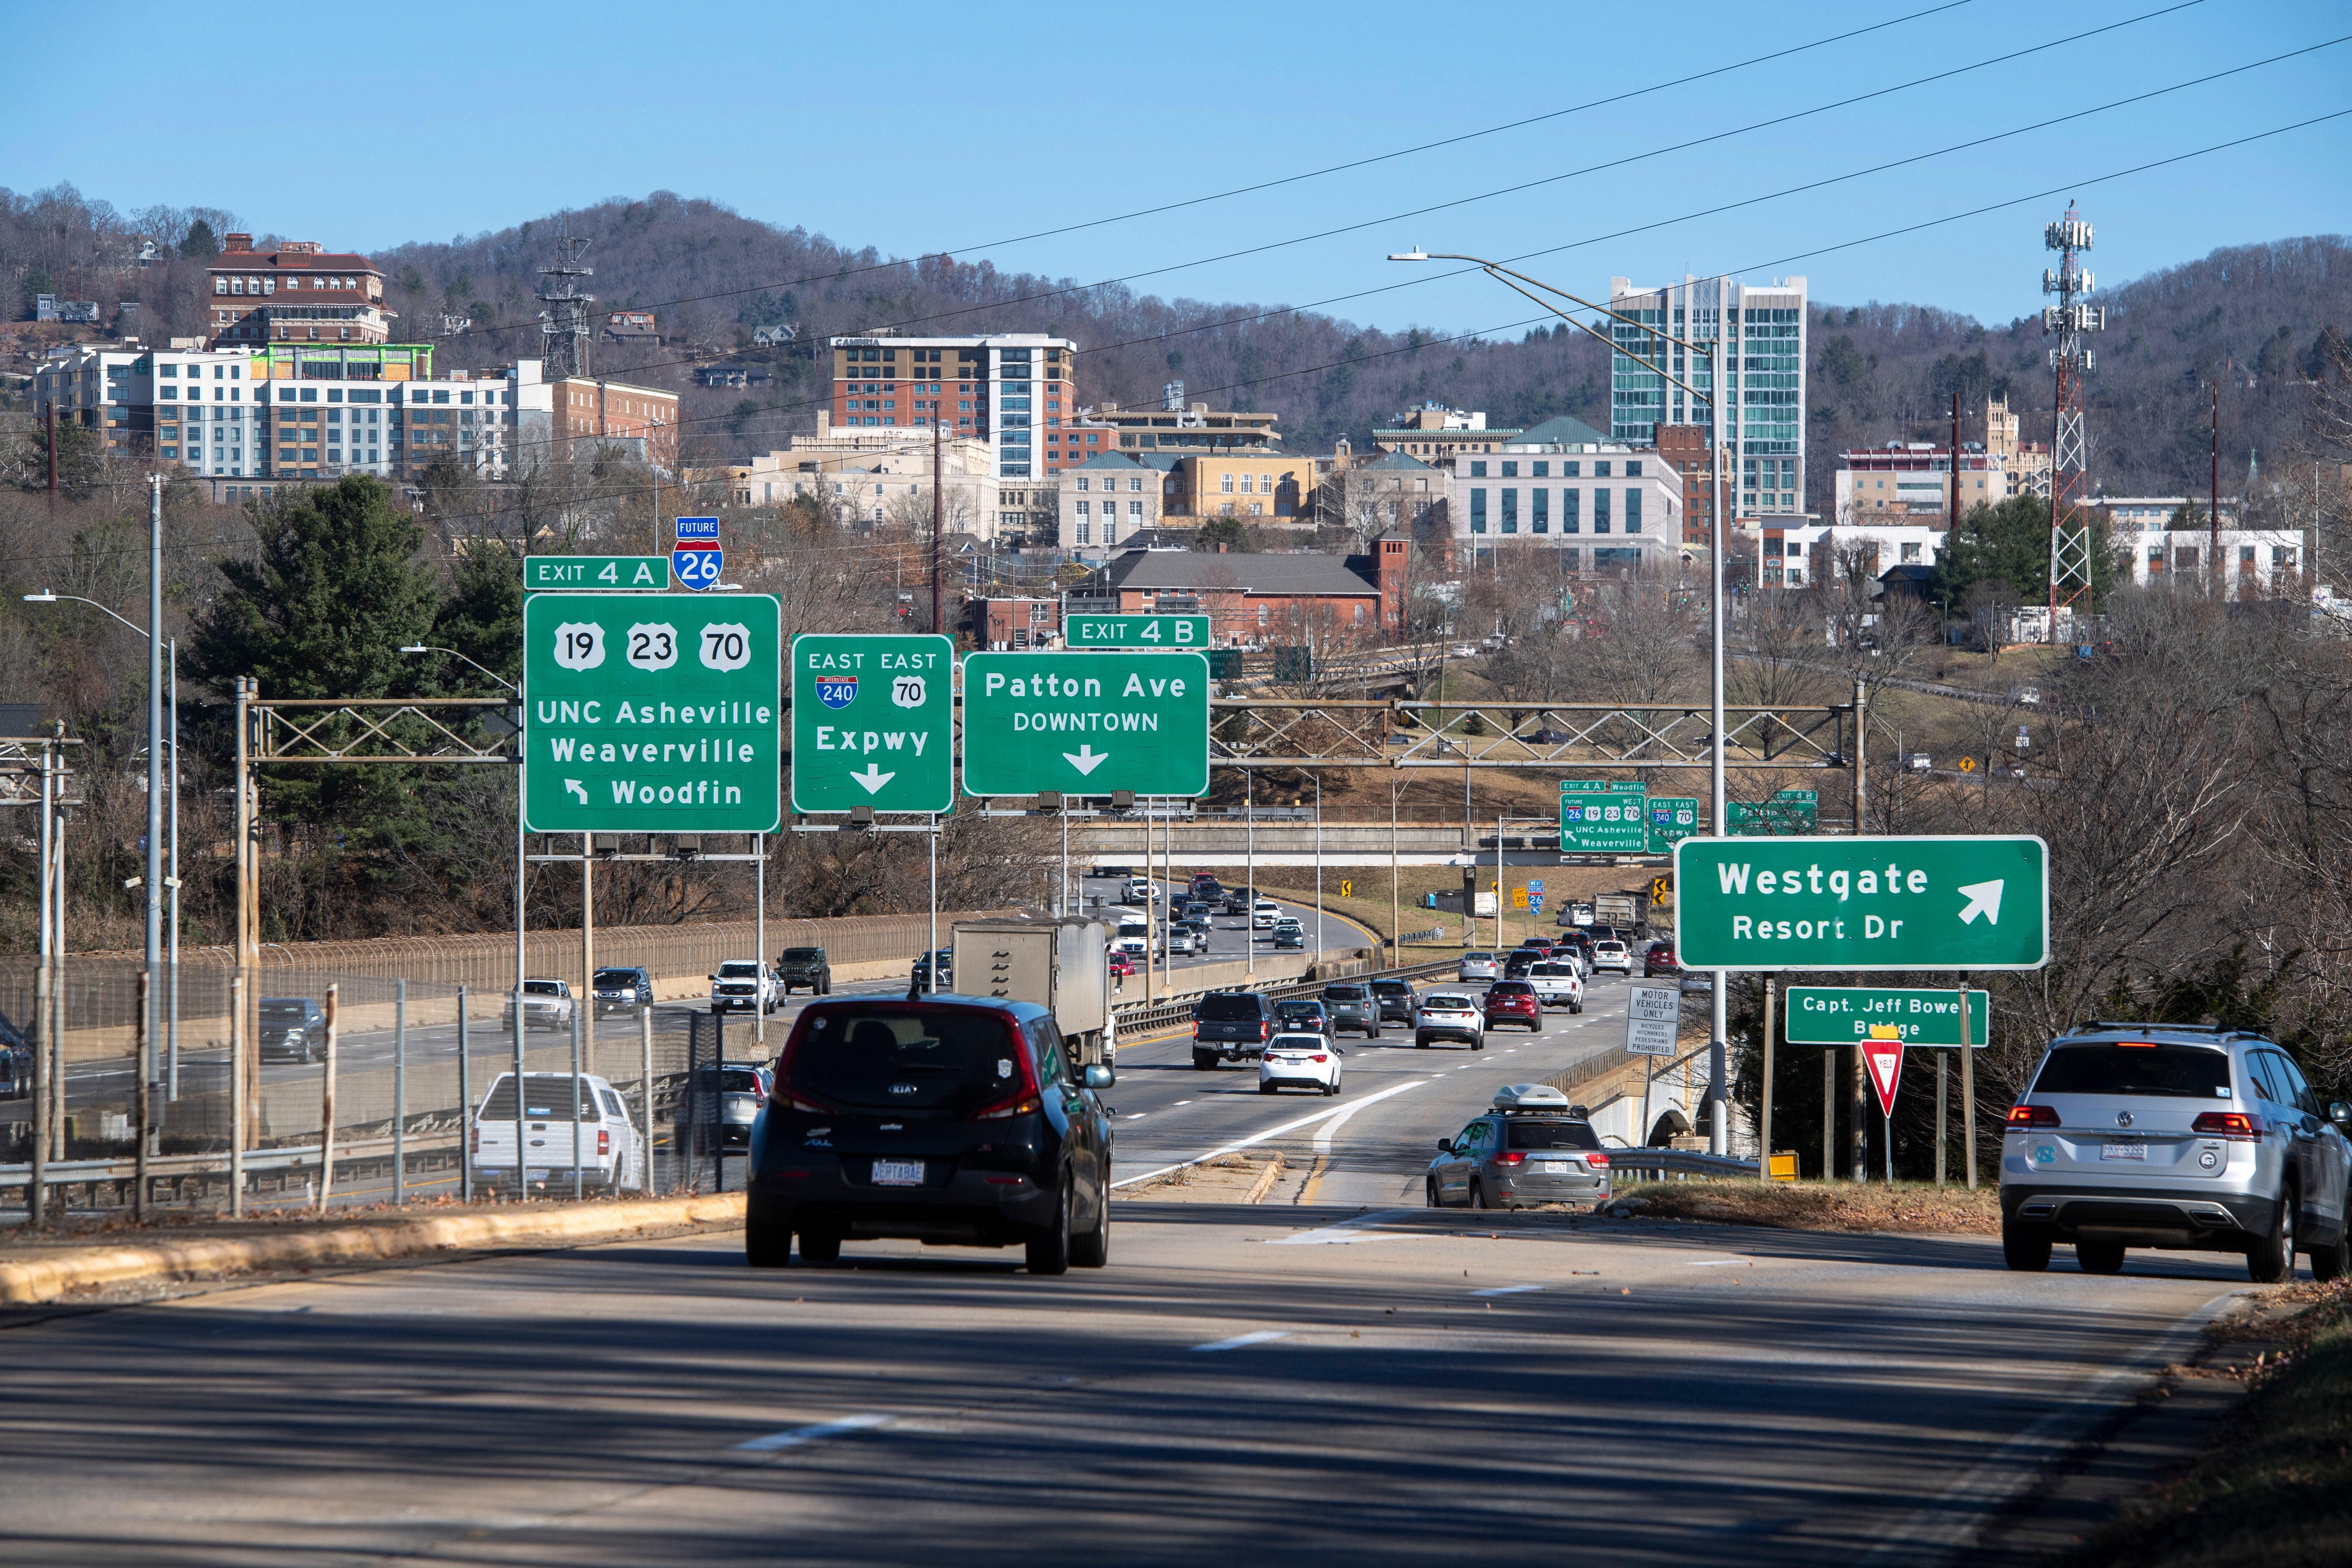 I-26 Connector Asheville section contract awarded, estimated to cost over $1 billion